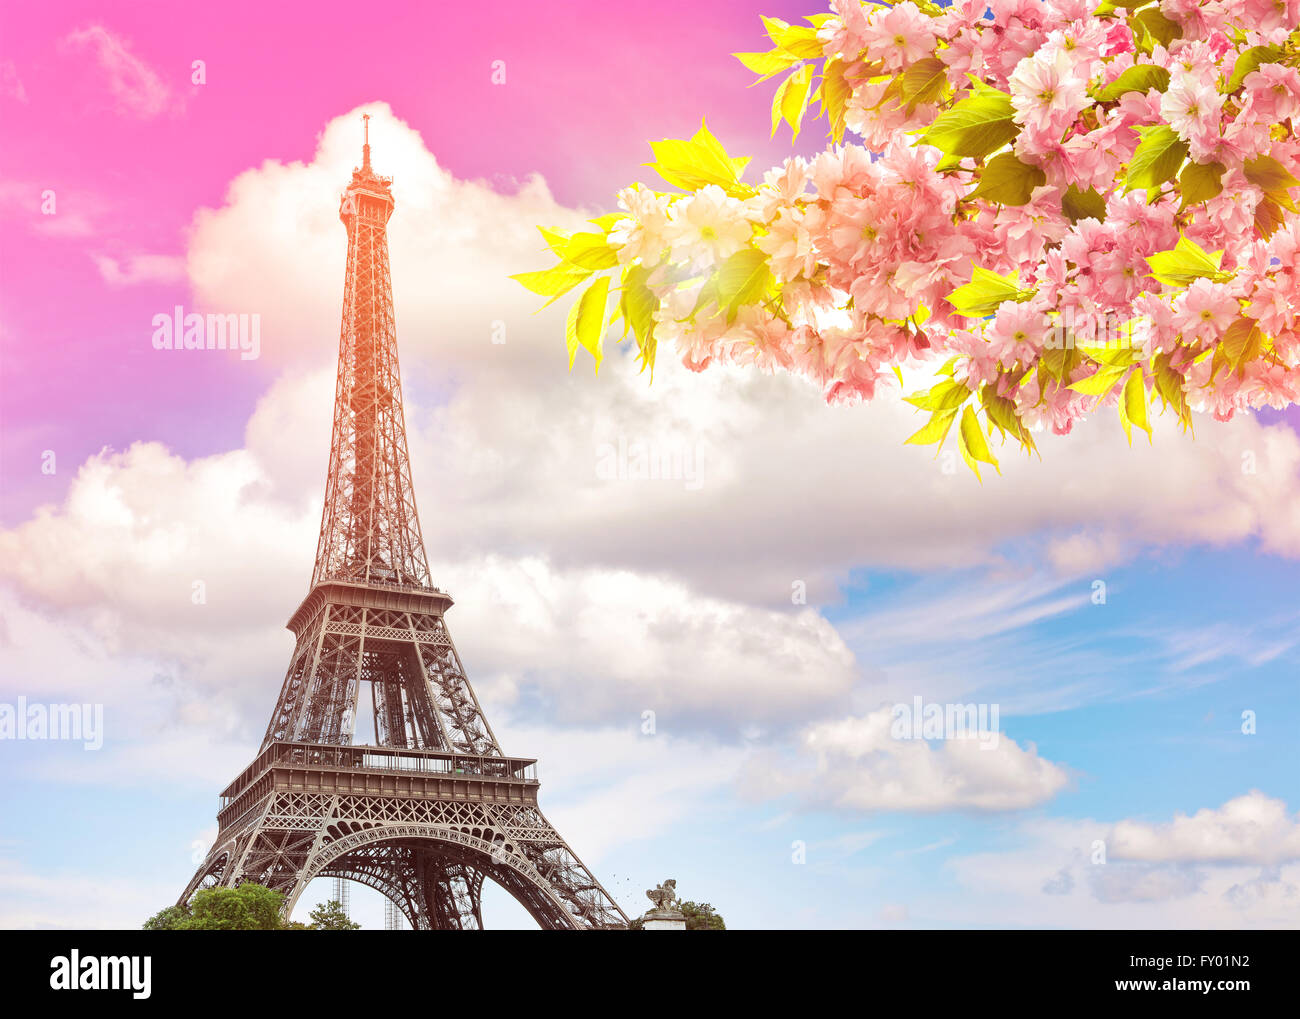 Eiffel Tower Paris against colorful blue sunset sky. Blossoming spring cherry tree. Vintage style toned picture Stock Photo